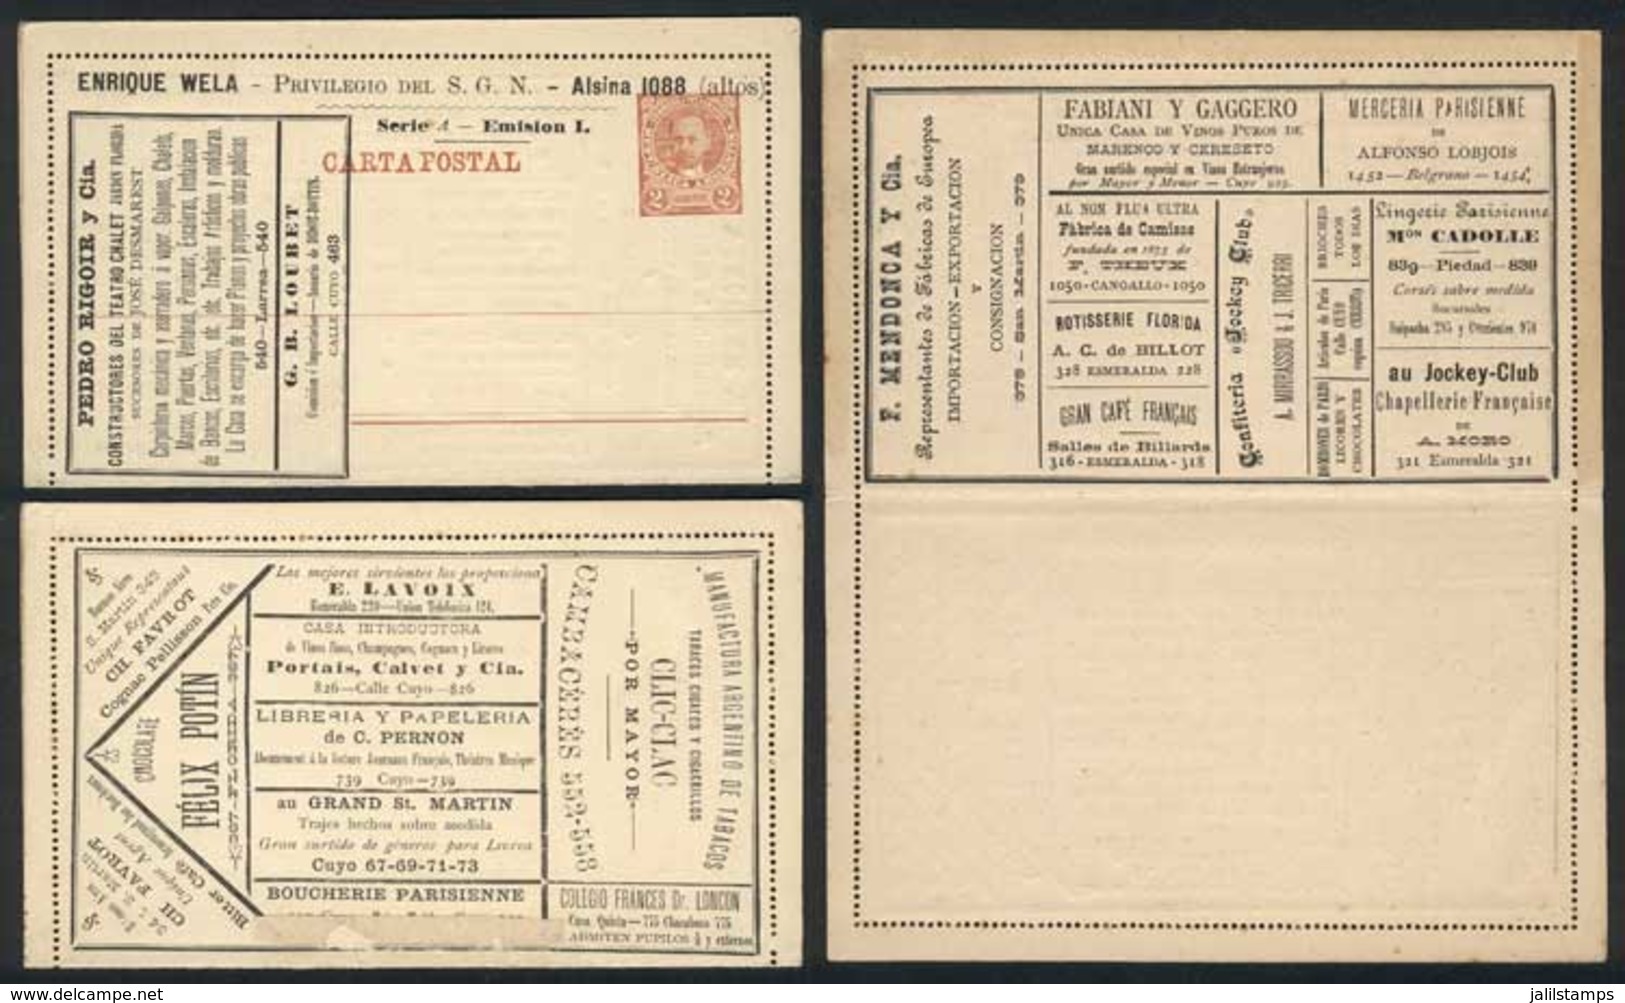 ARGENTINA: VK.6b Lettersheet, WITH ADVERTISEMENT, A Number Of Ads: Tobacco, Cigarettes, Chocolate, Wine, Taylor's, Food, - Postal Stationery